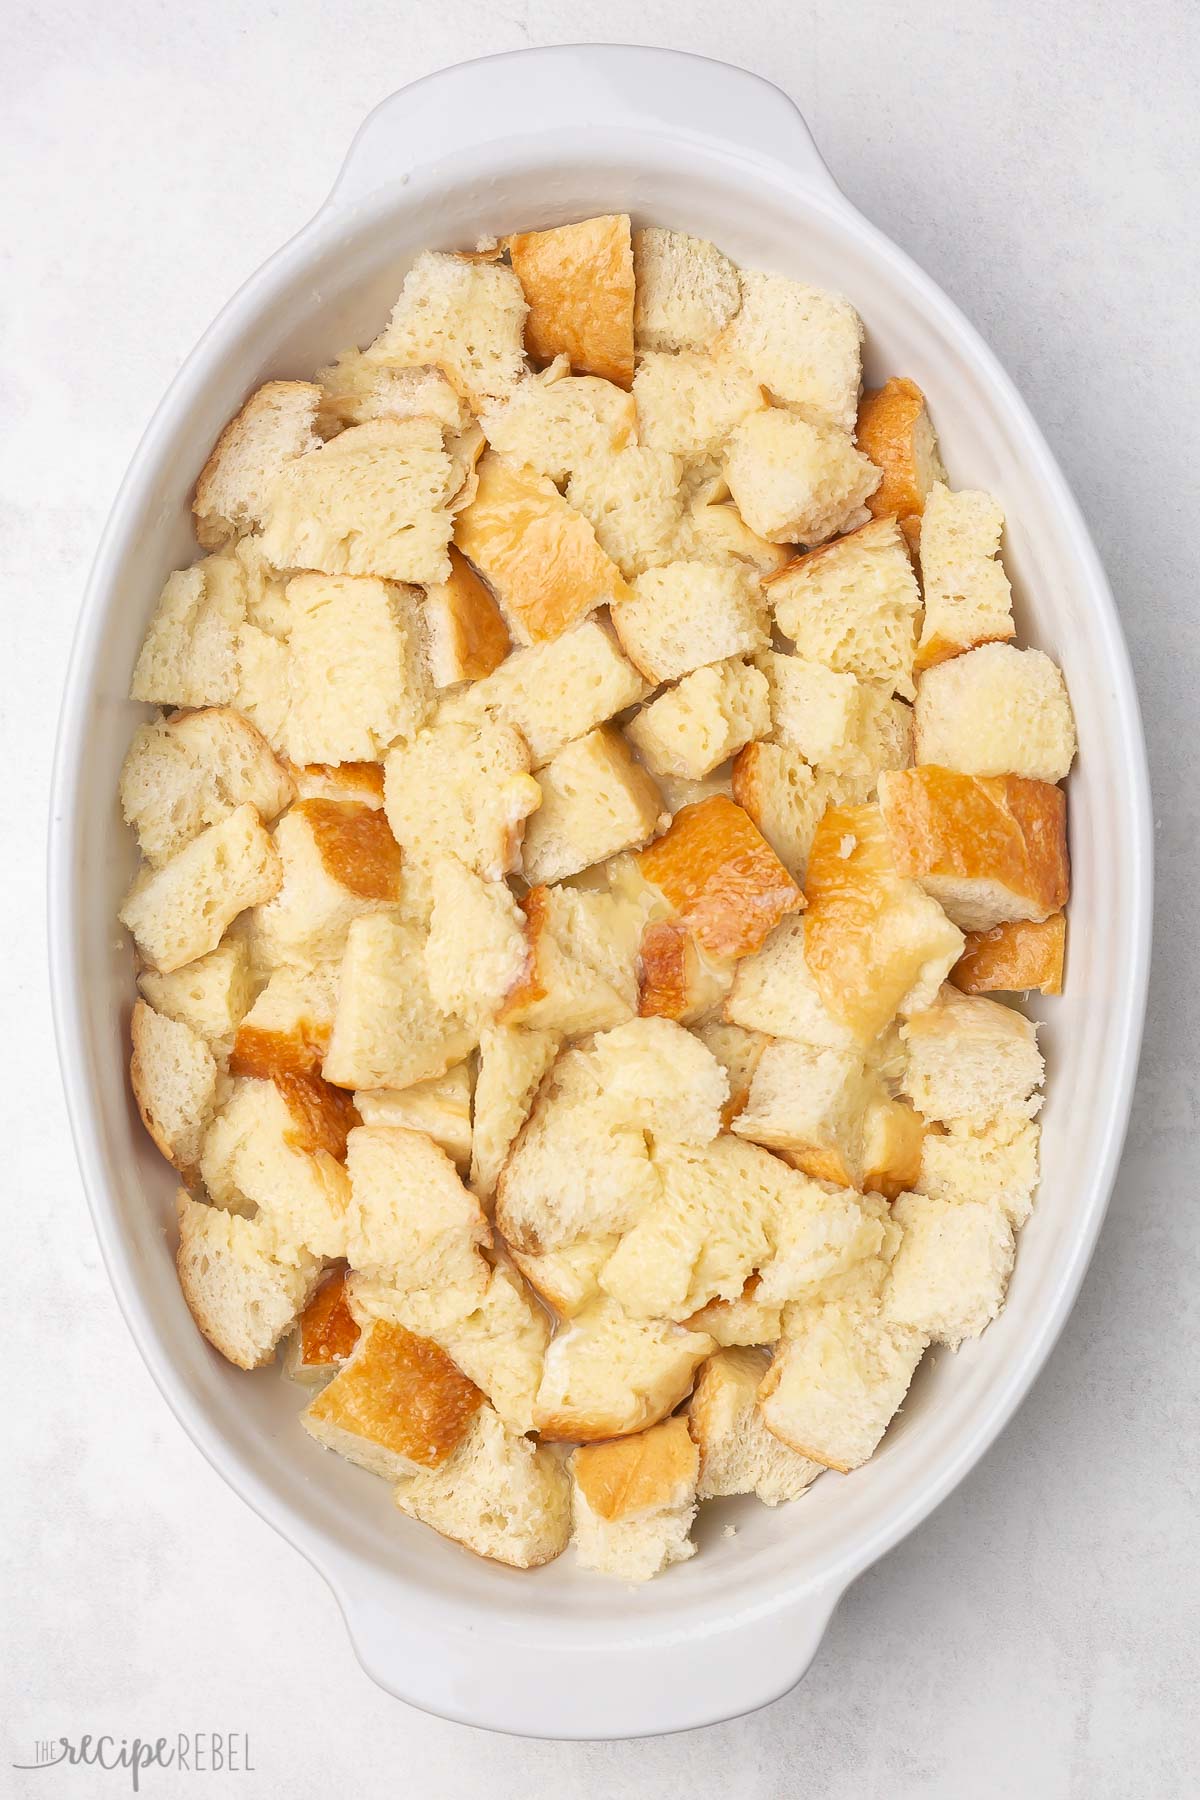 Top view of a casserole dish with bread cubes soaking in an egg mixture. 